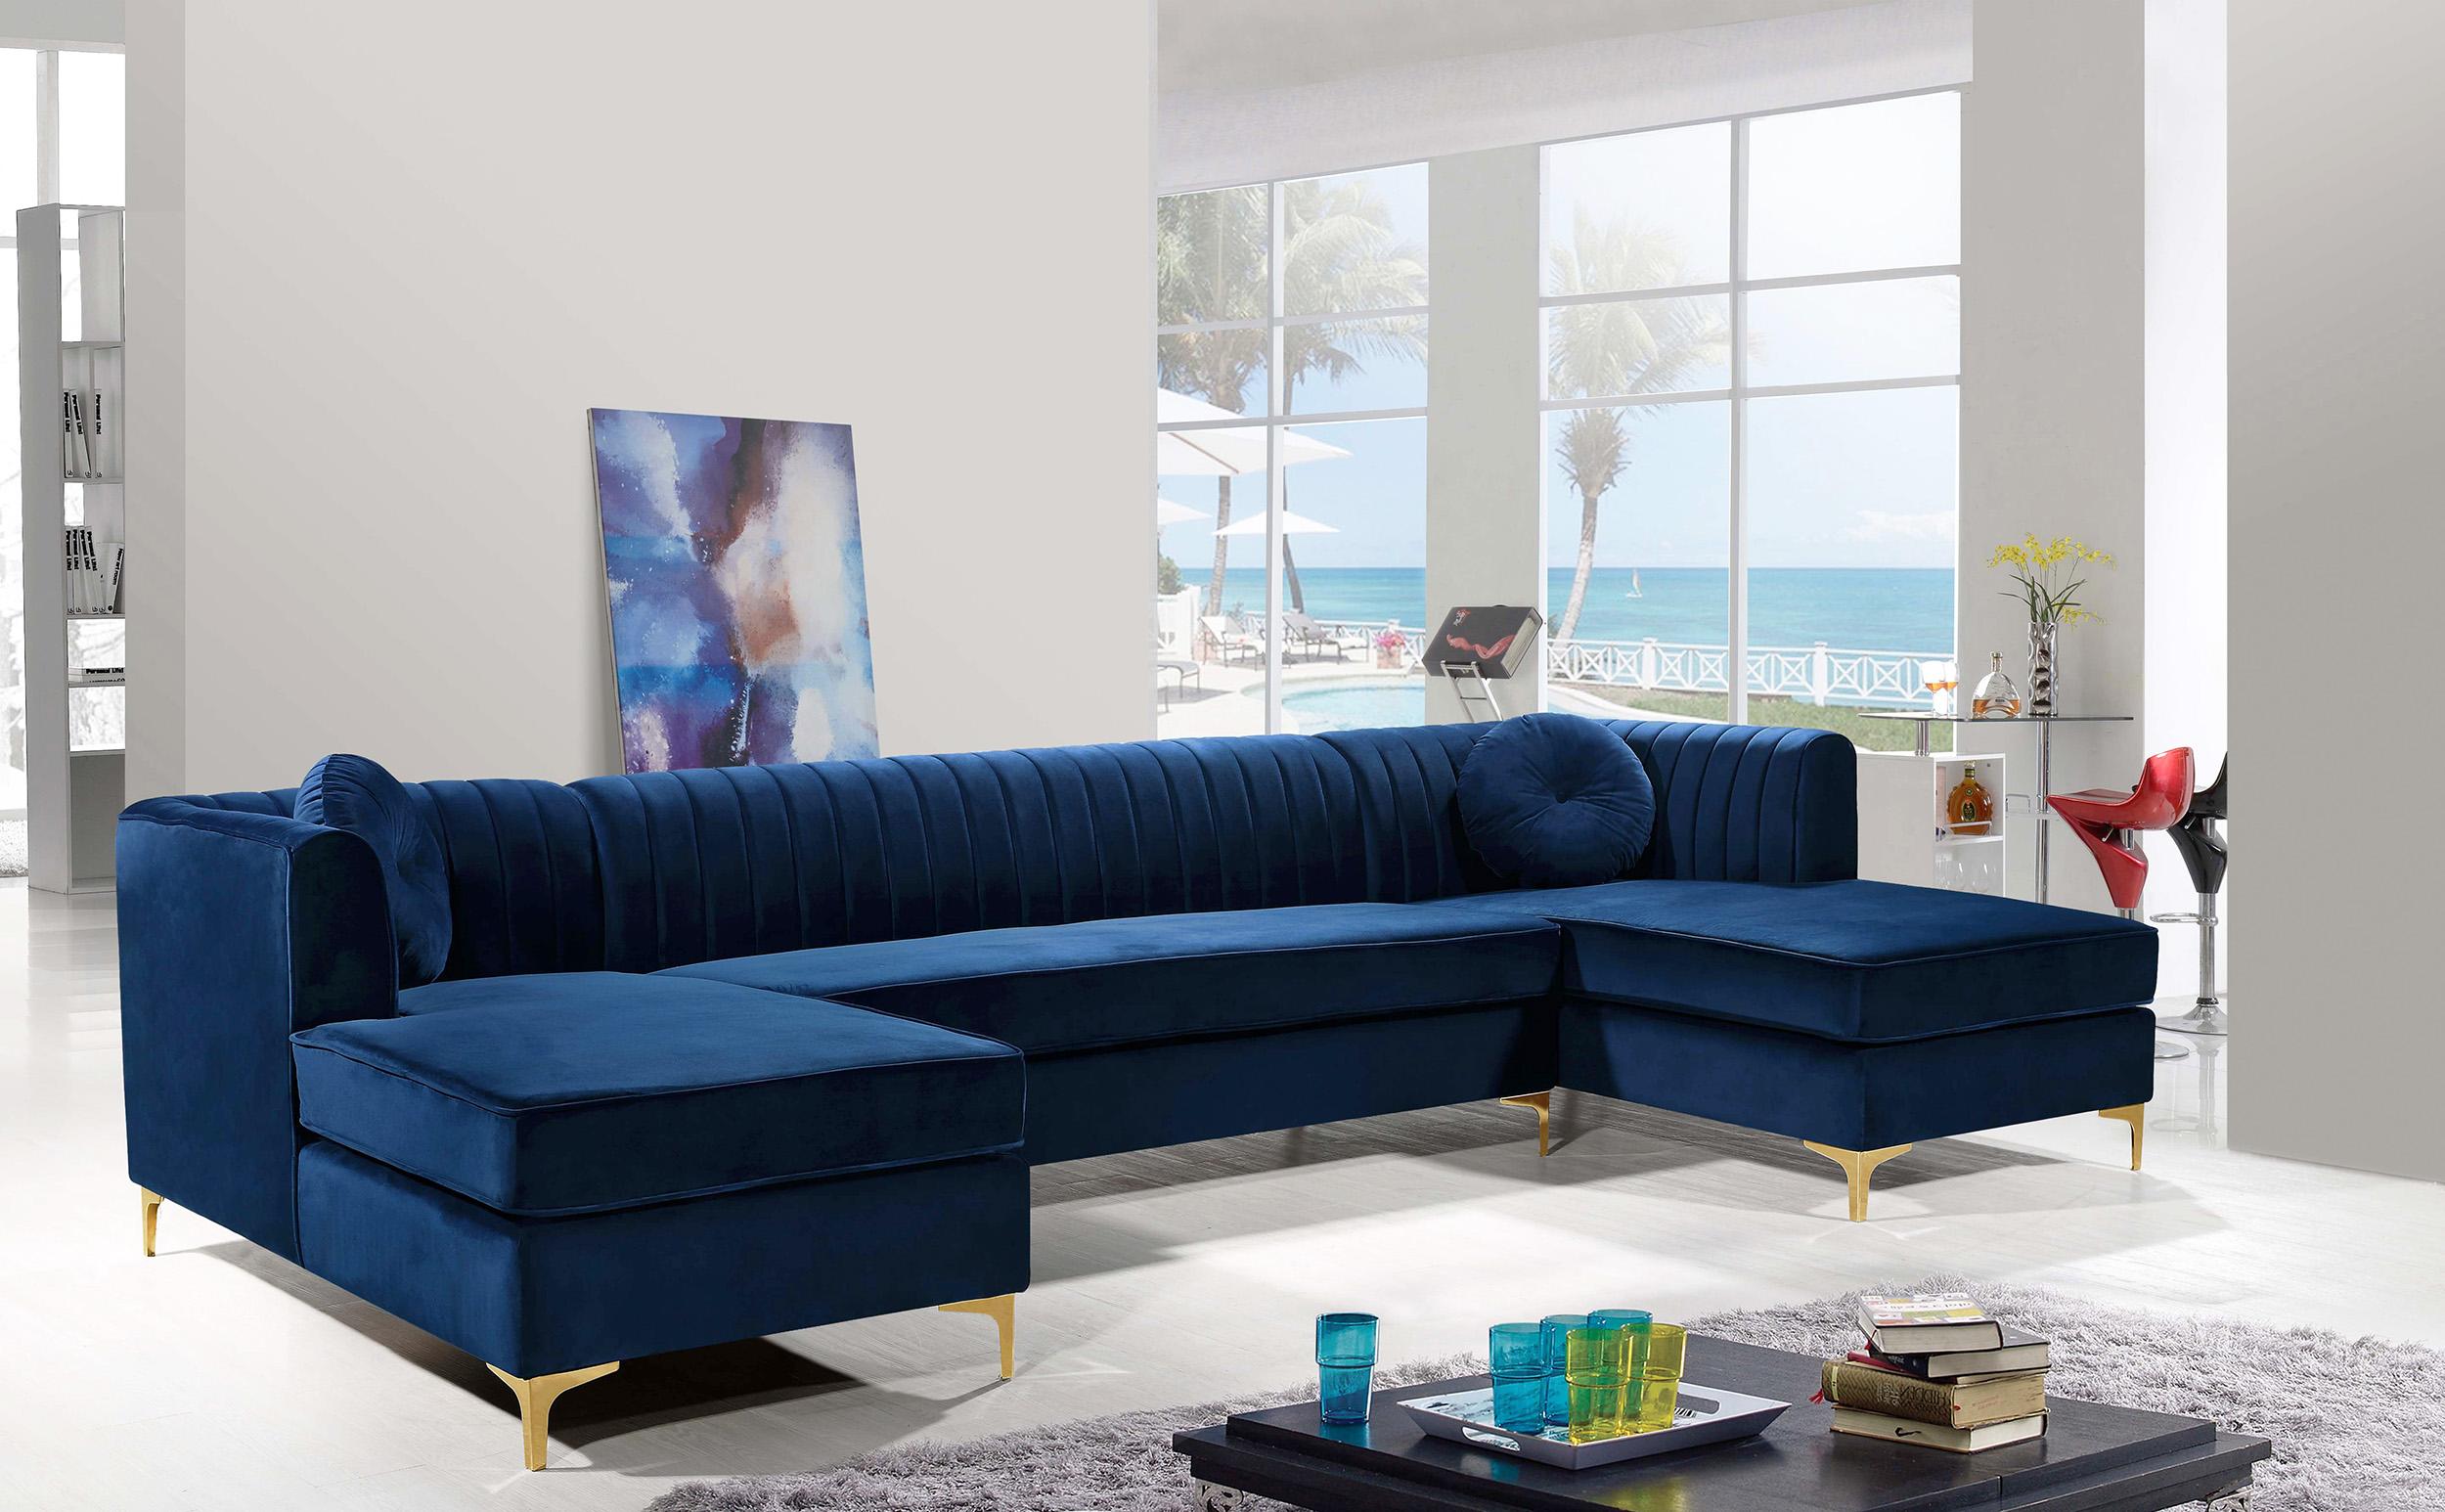 

    
Meridian Furniture Graham 661Navy Sectional Sofa Navy blue 661Navy-Sectional
